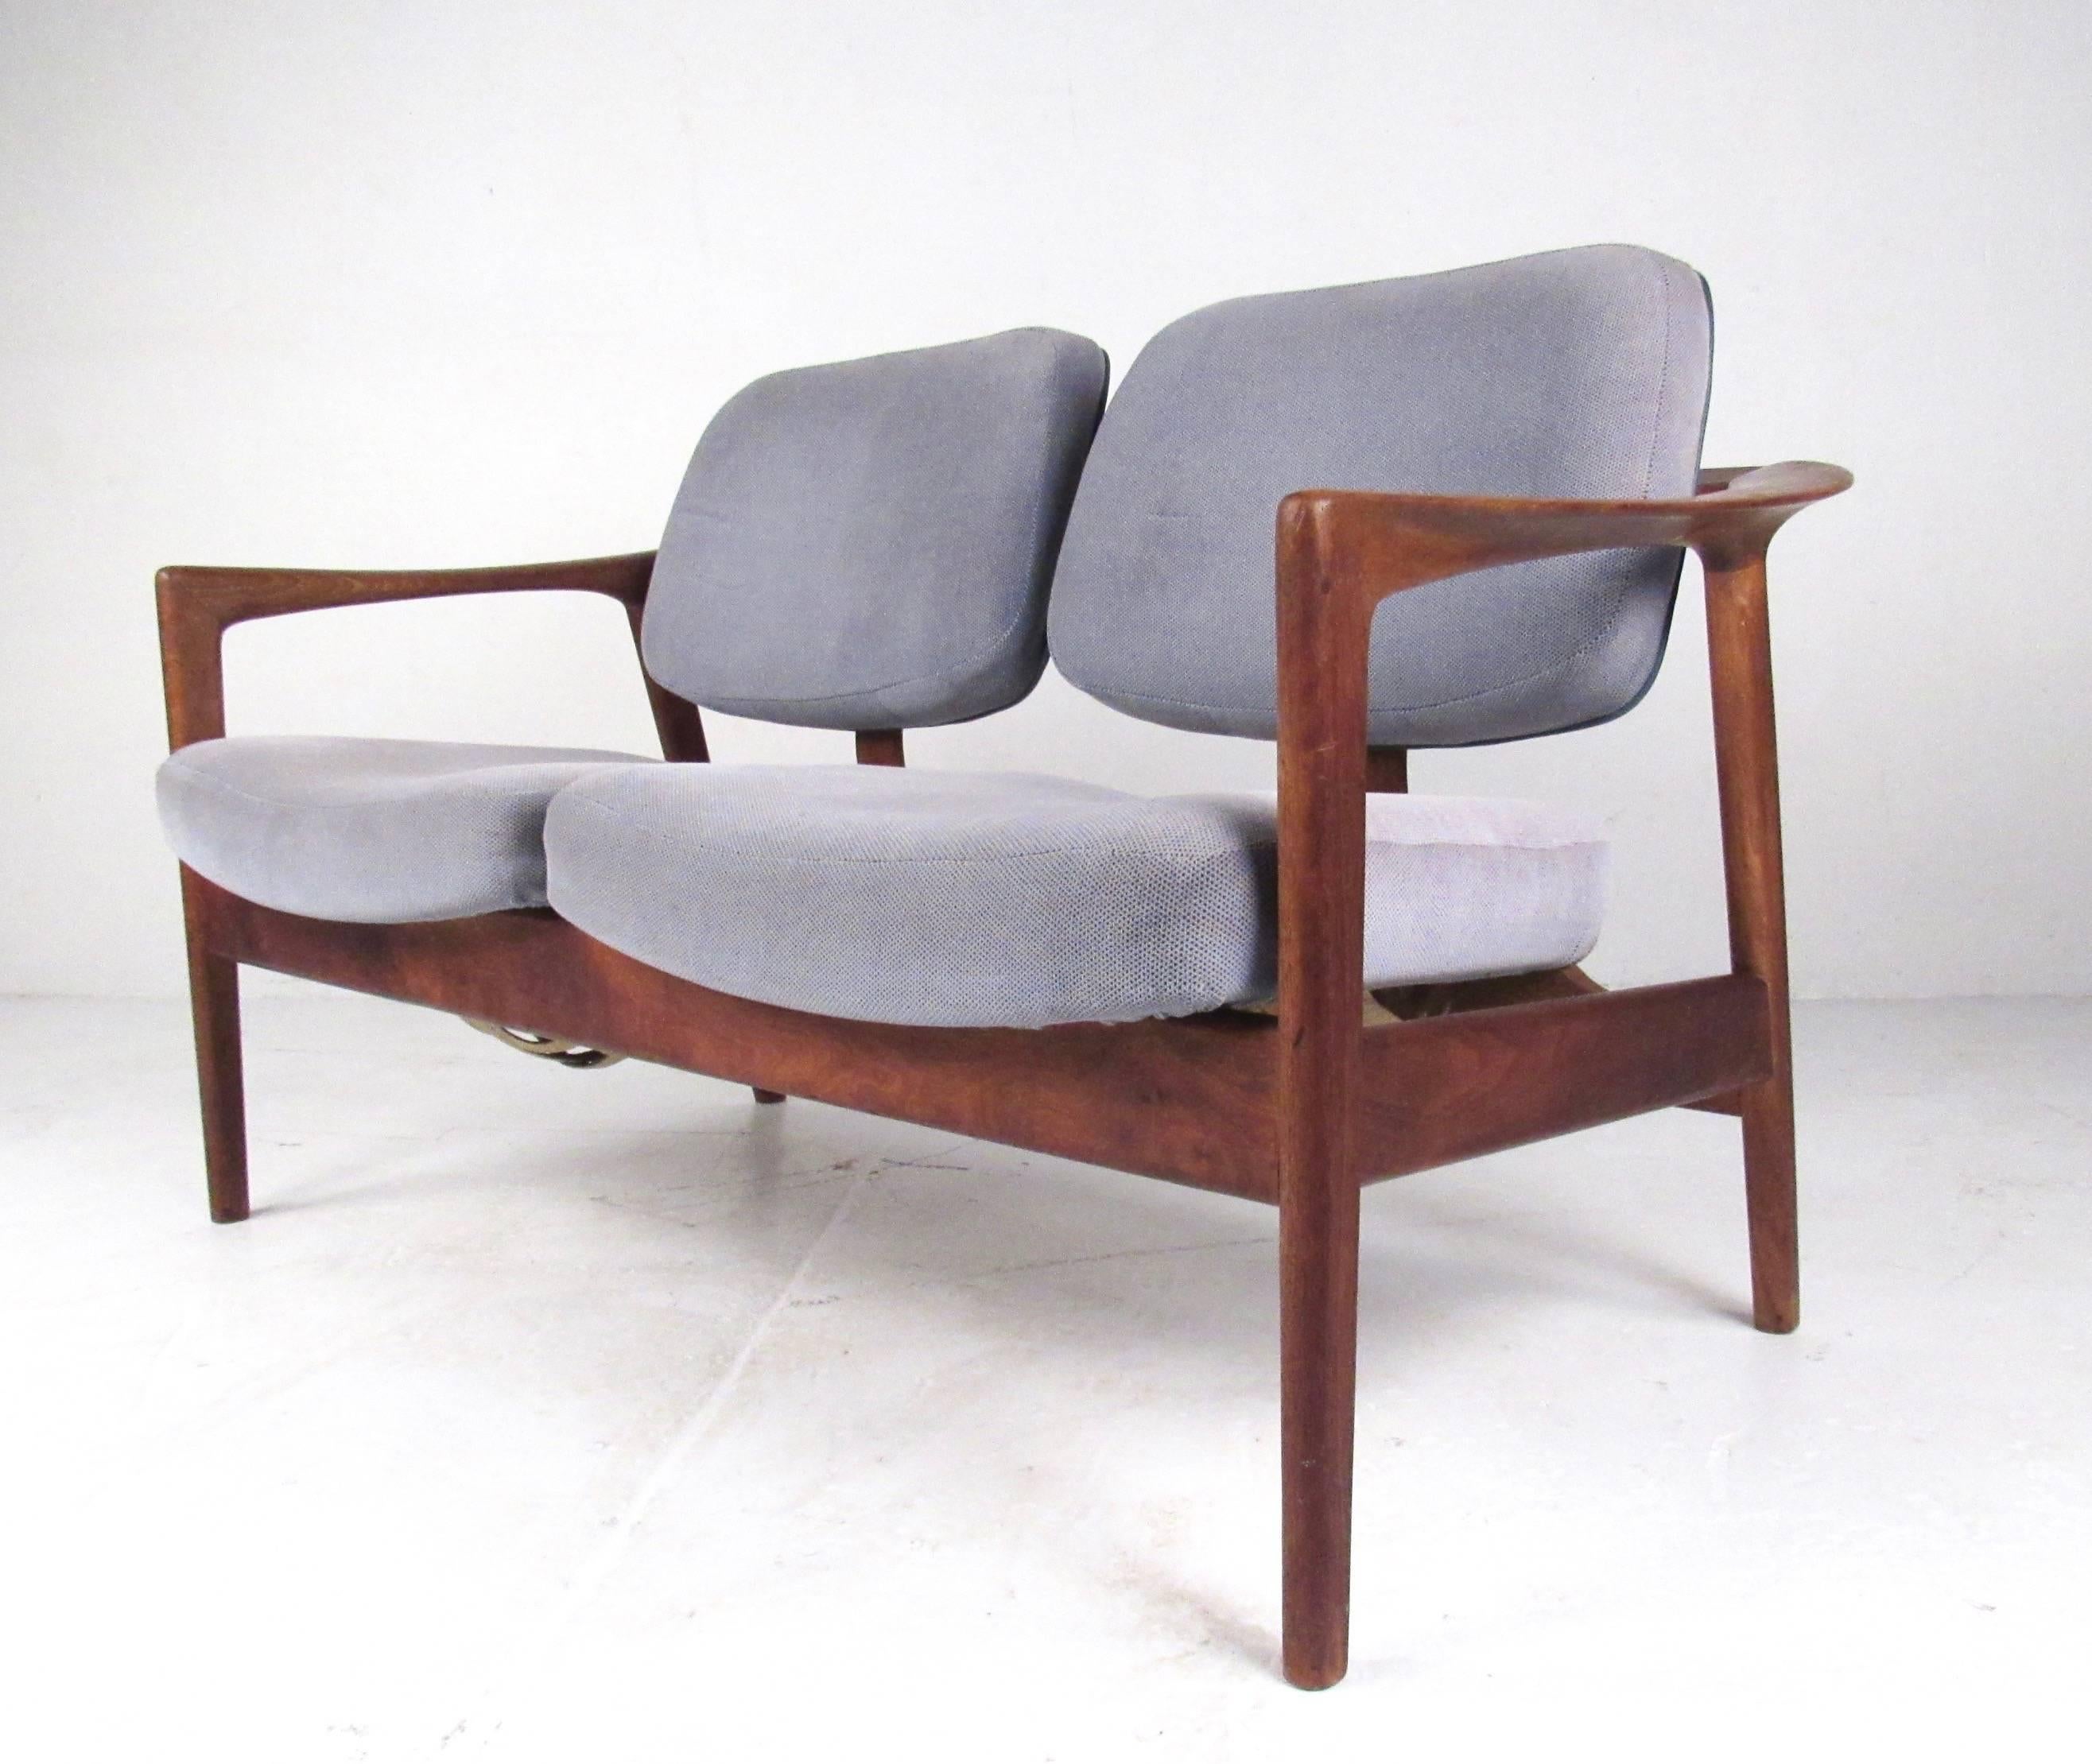 Distinctive Scandinavian Modern design sets this vintage DUX love seat apart from other seating options. The midcentury Swedish design features stylish two-seat arrangement, solid teak frame, and quality vintage upholstery. An ideal addition to home